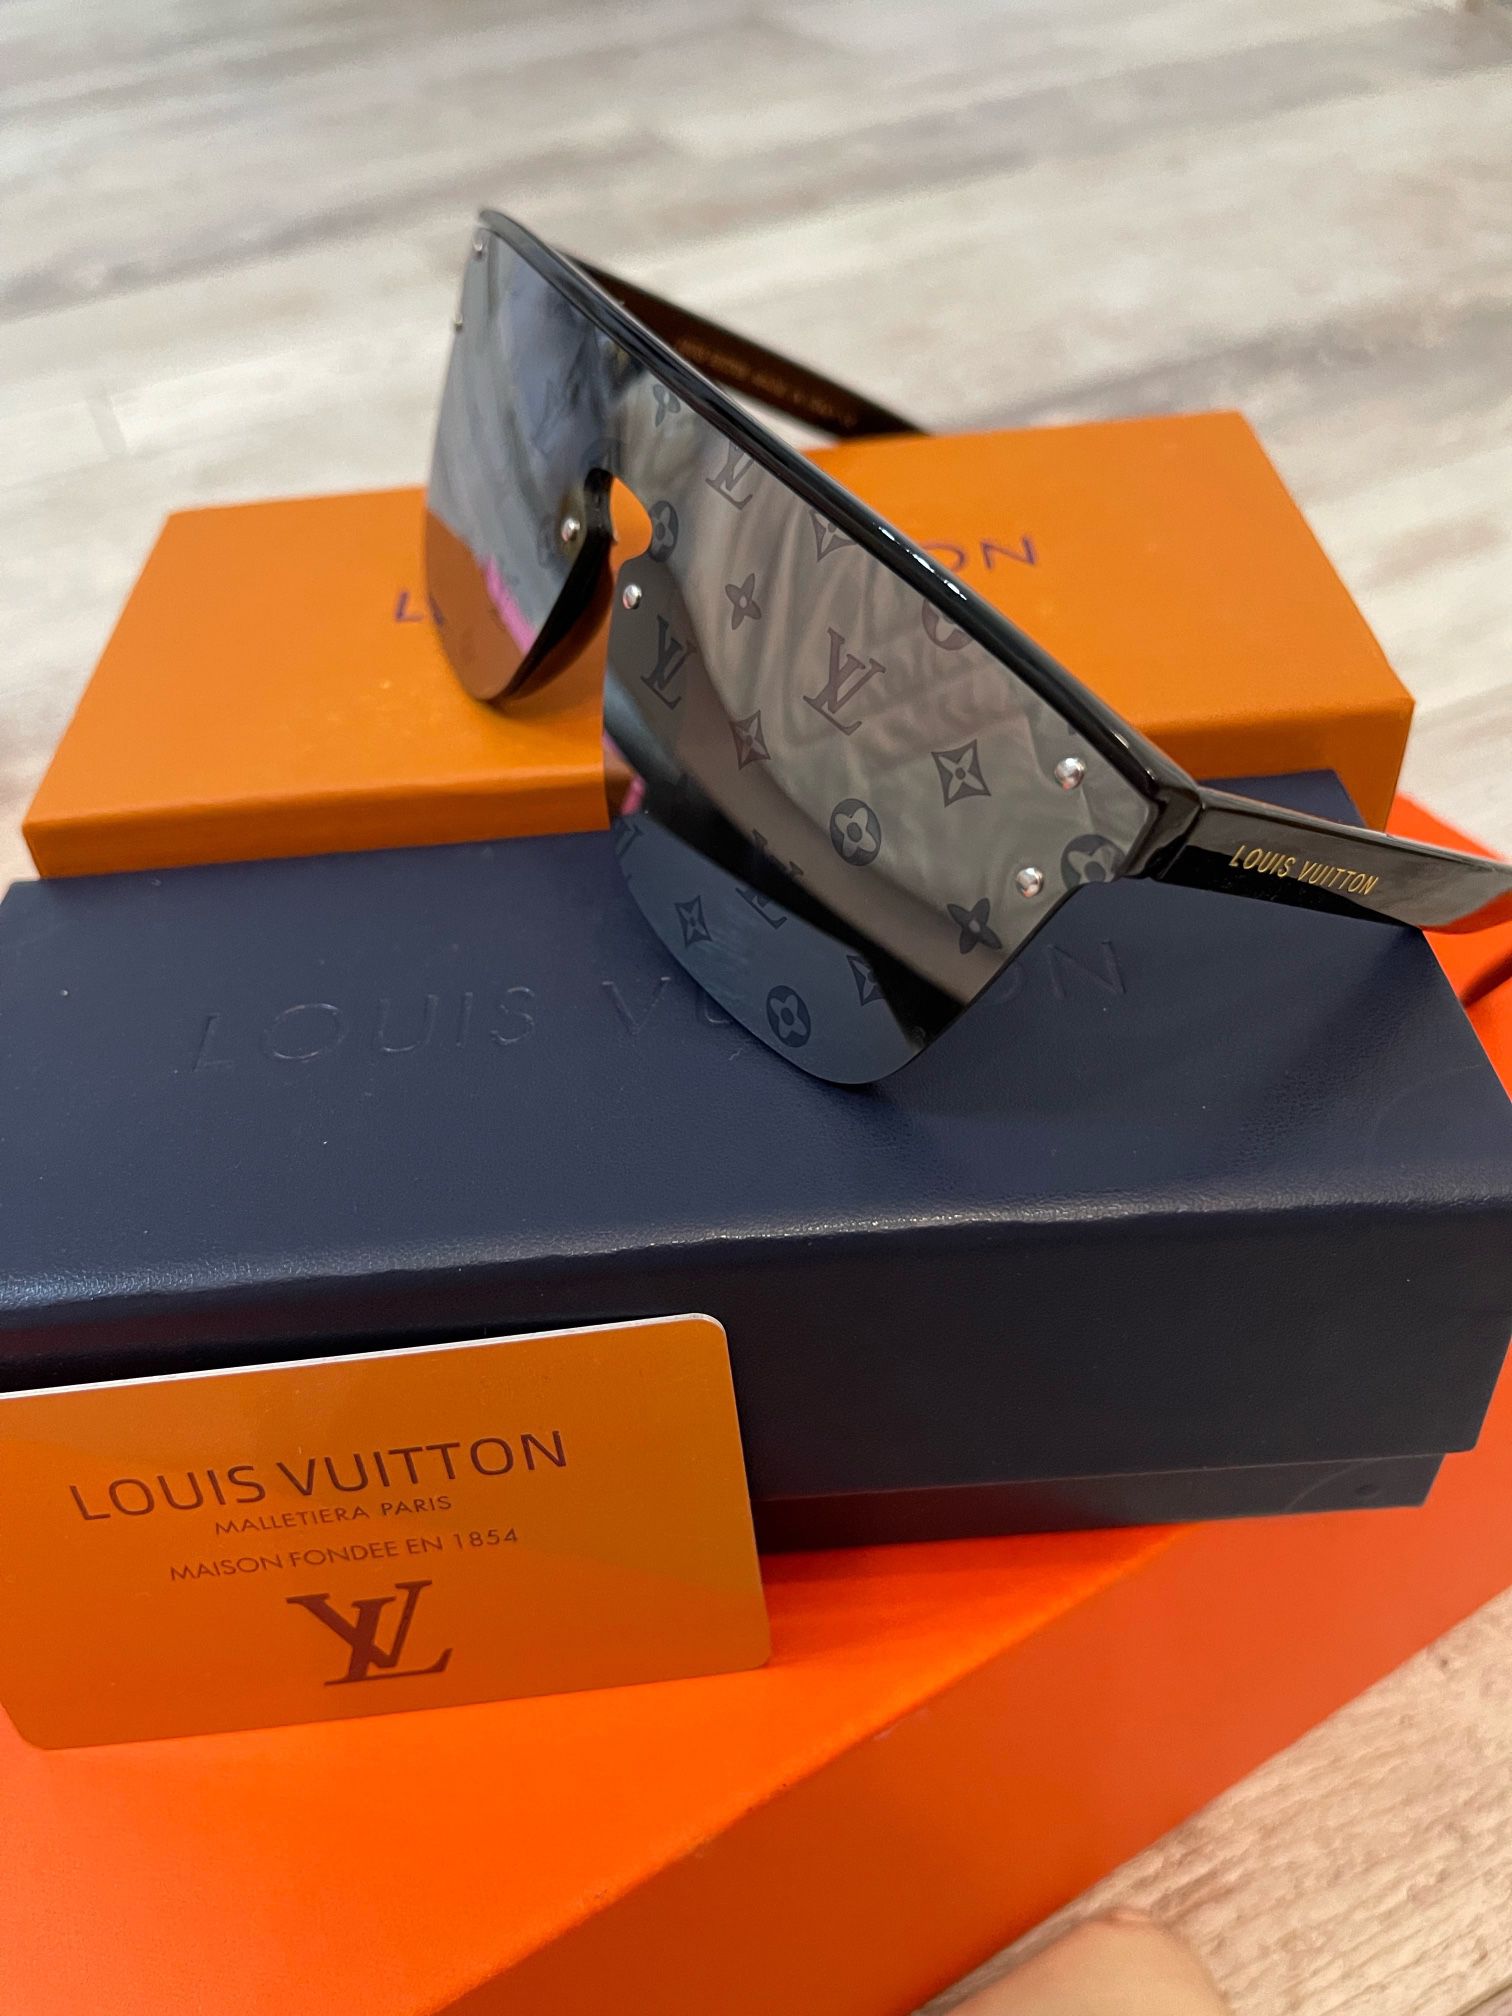 Lentes Sol for Sale in Irving, TX - OfferUp